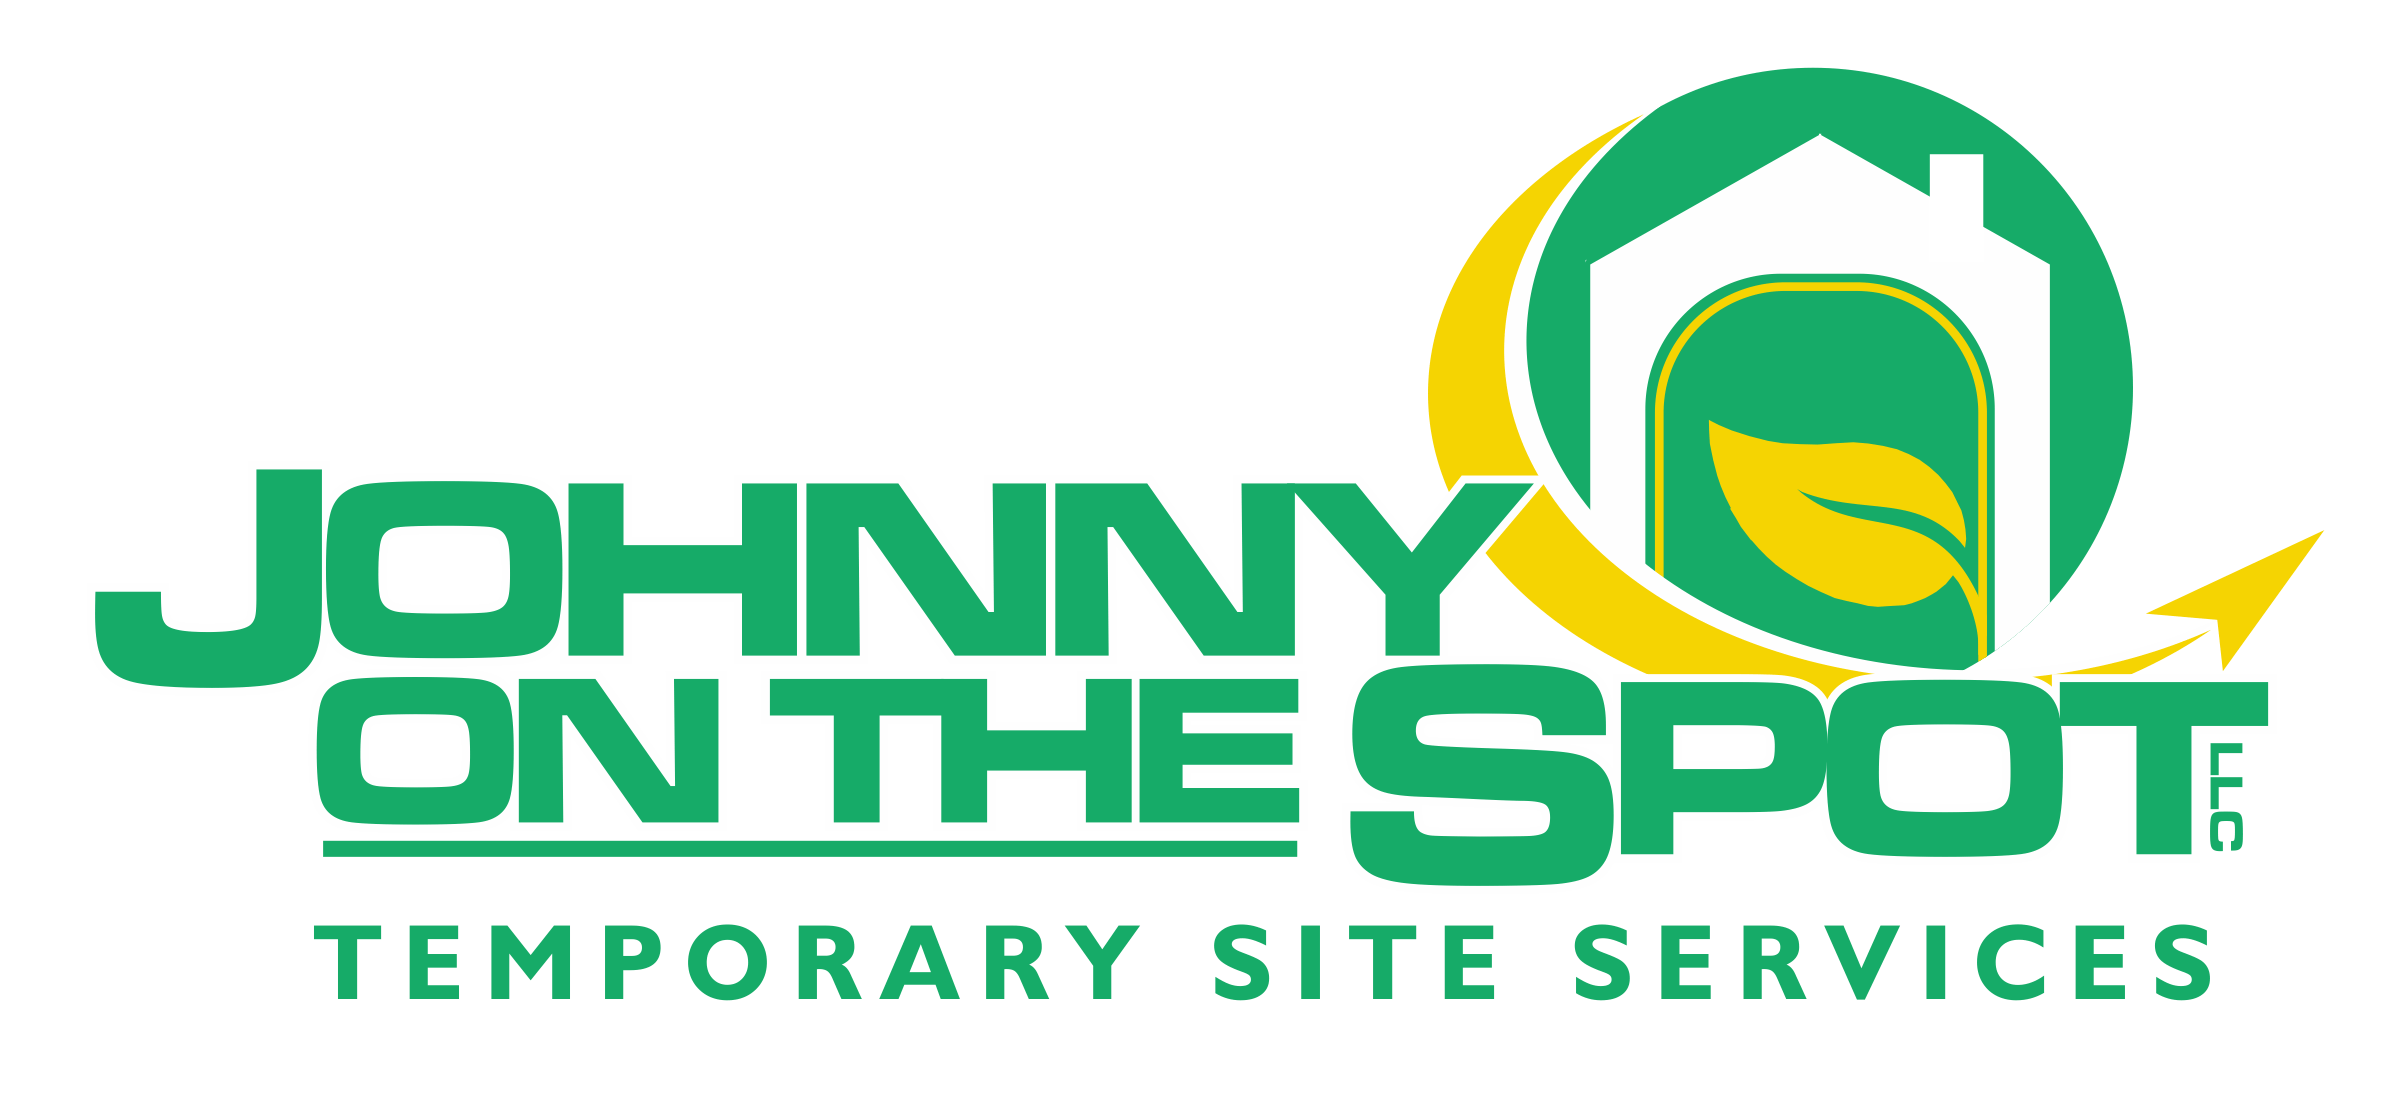 Thespot Logo - File:Logo of Johnny on the Spot.png - Wikimedia Commons